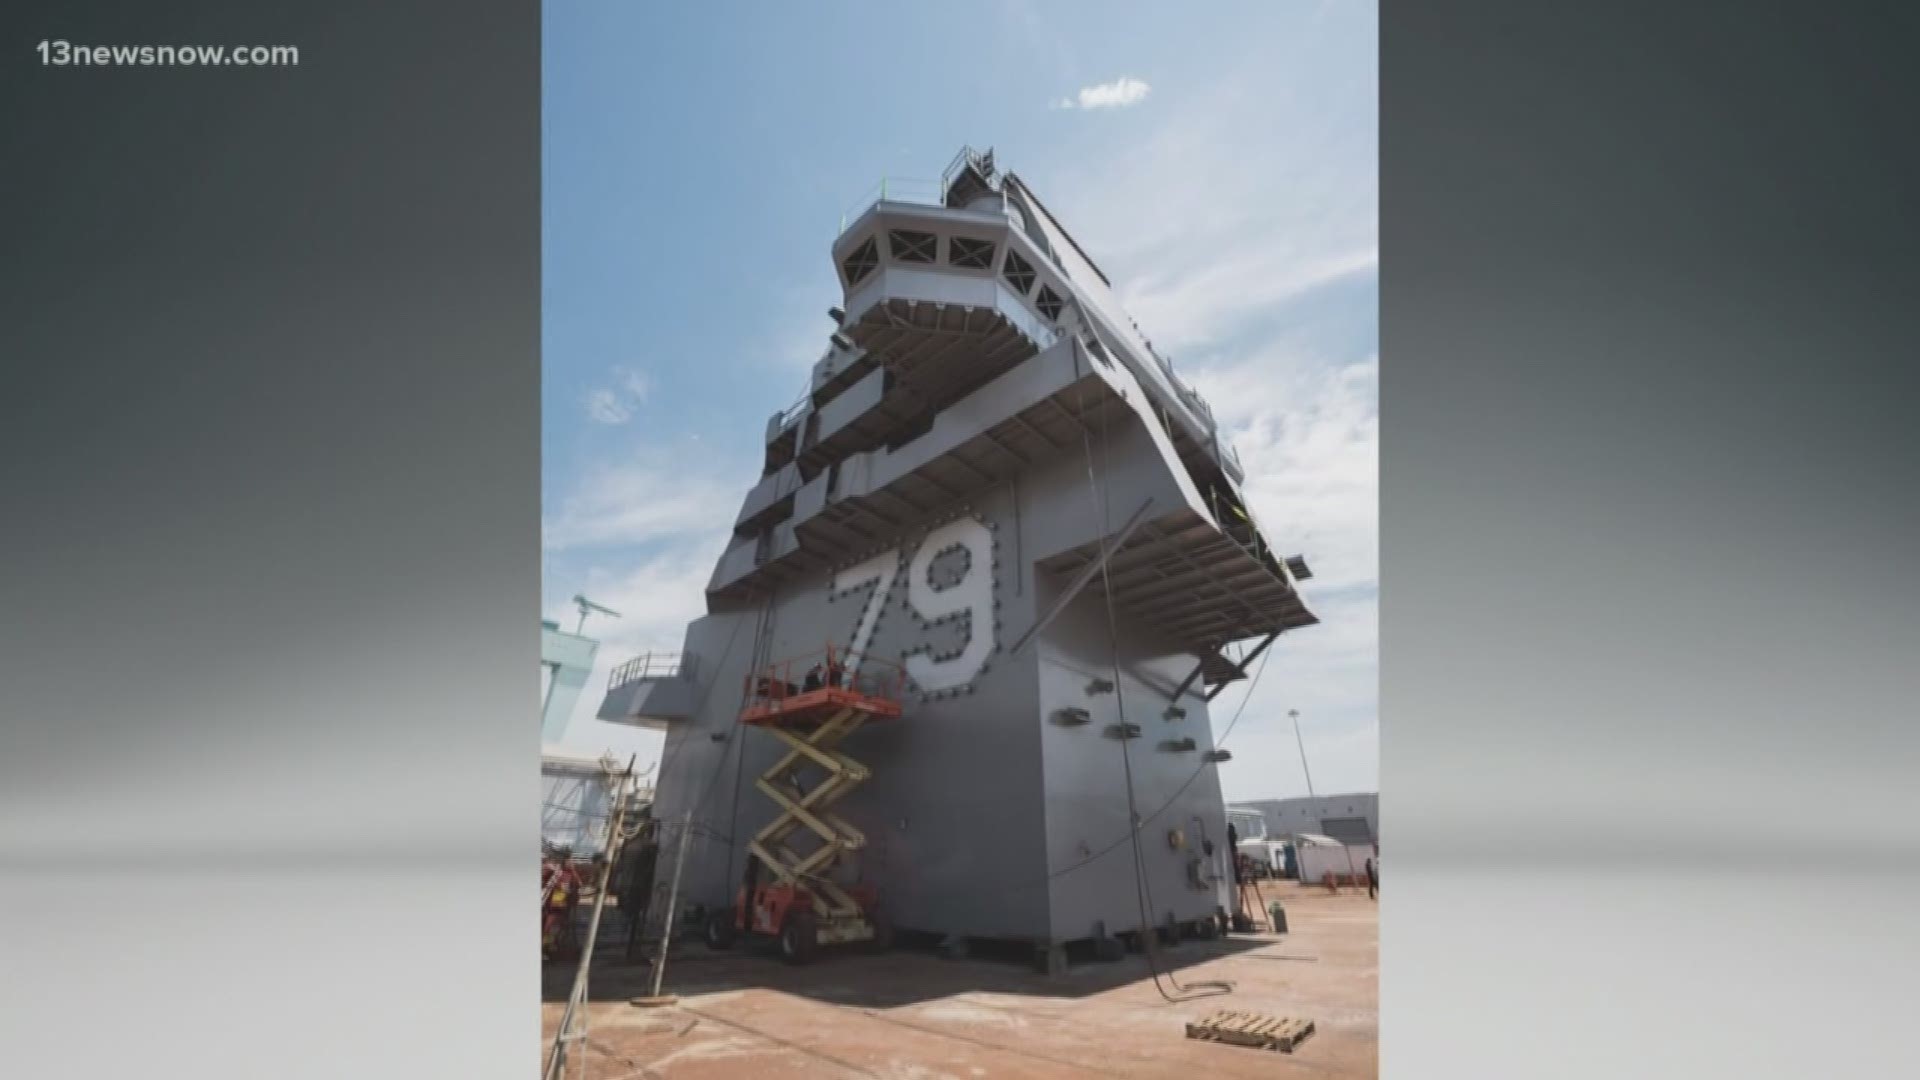 The 555-metric ton island bearing the number "79" will be raised and lowered into place on board the future USS John F. Kennedy's flight deck. The ceremony at Newport News Shipbuilding will mark the final super lift in the construction process of the 100,000-ton warship